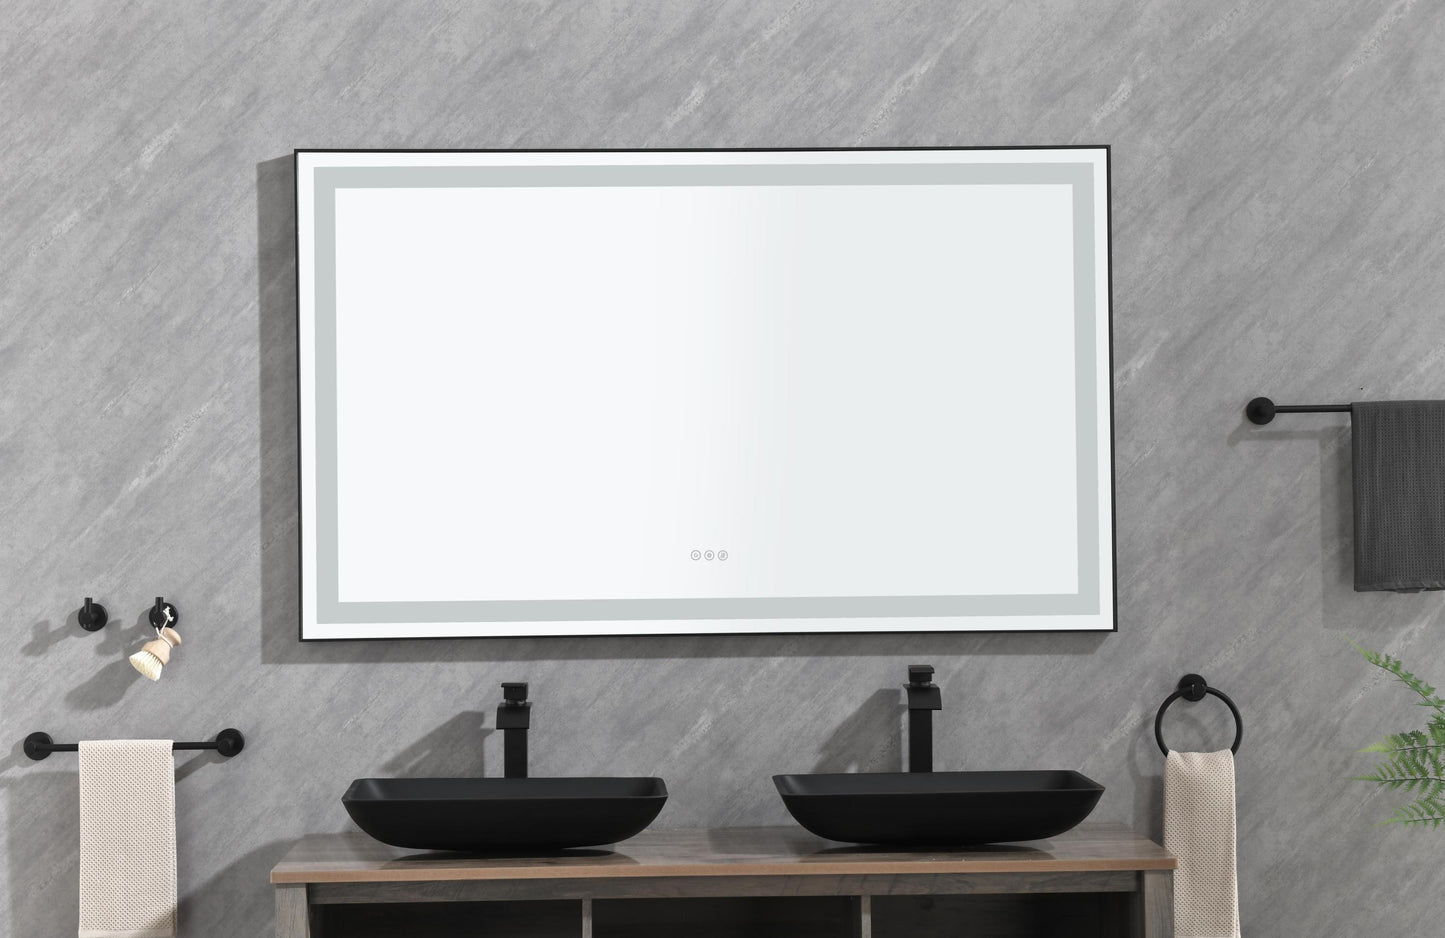 LTL needs to consult the warehouse address60*48 LED Lighted Bathroom Wall Mounted Mirror with High Lumen+Anti-Fog Separately Control